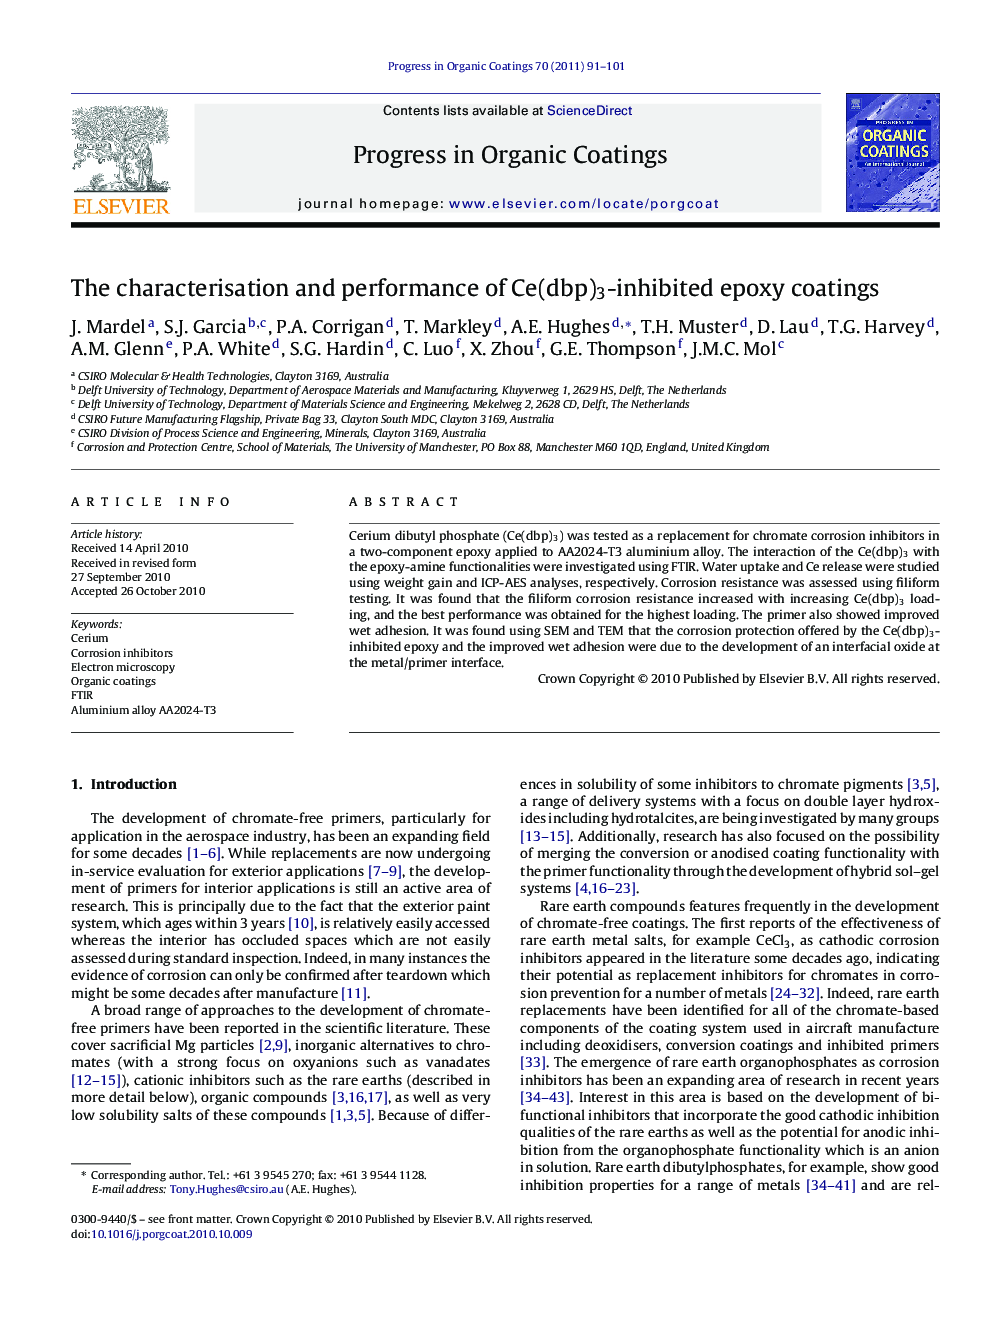 The characterisation and performance of Ce(dbp)3-inhibited epoxy coatings